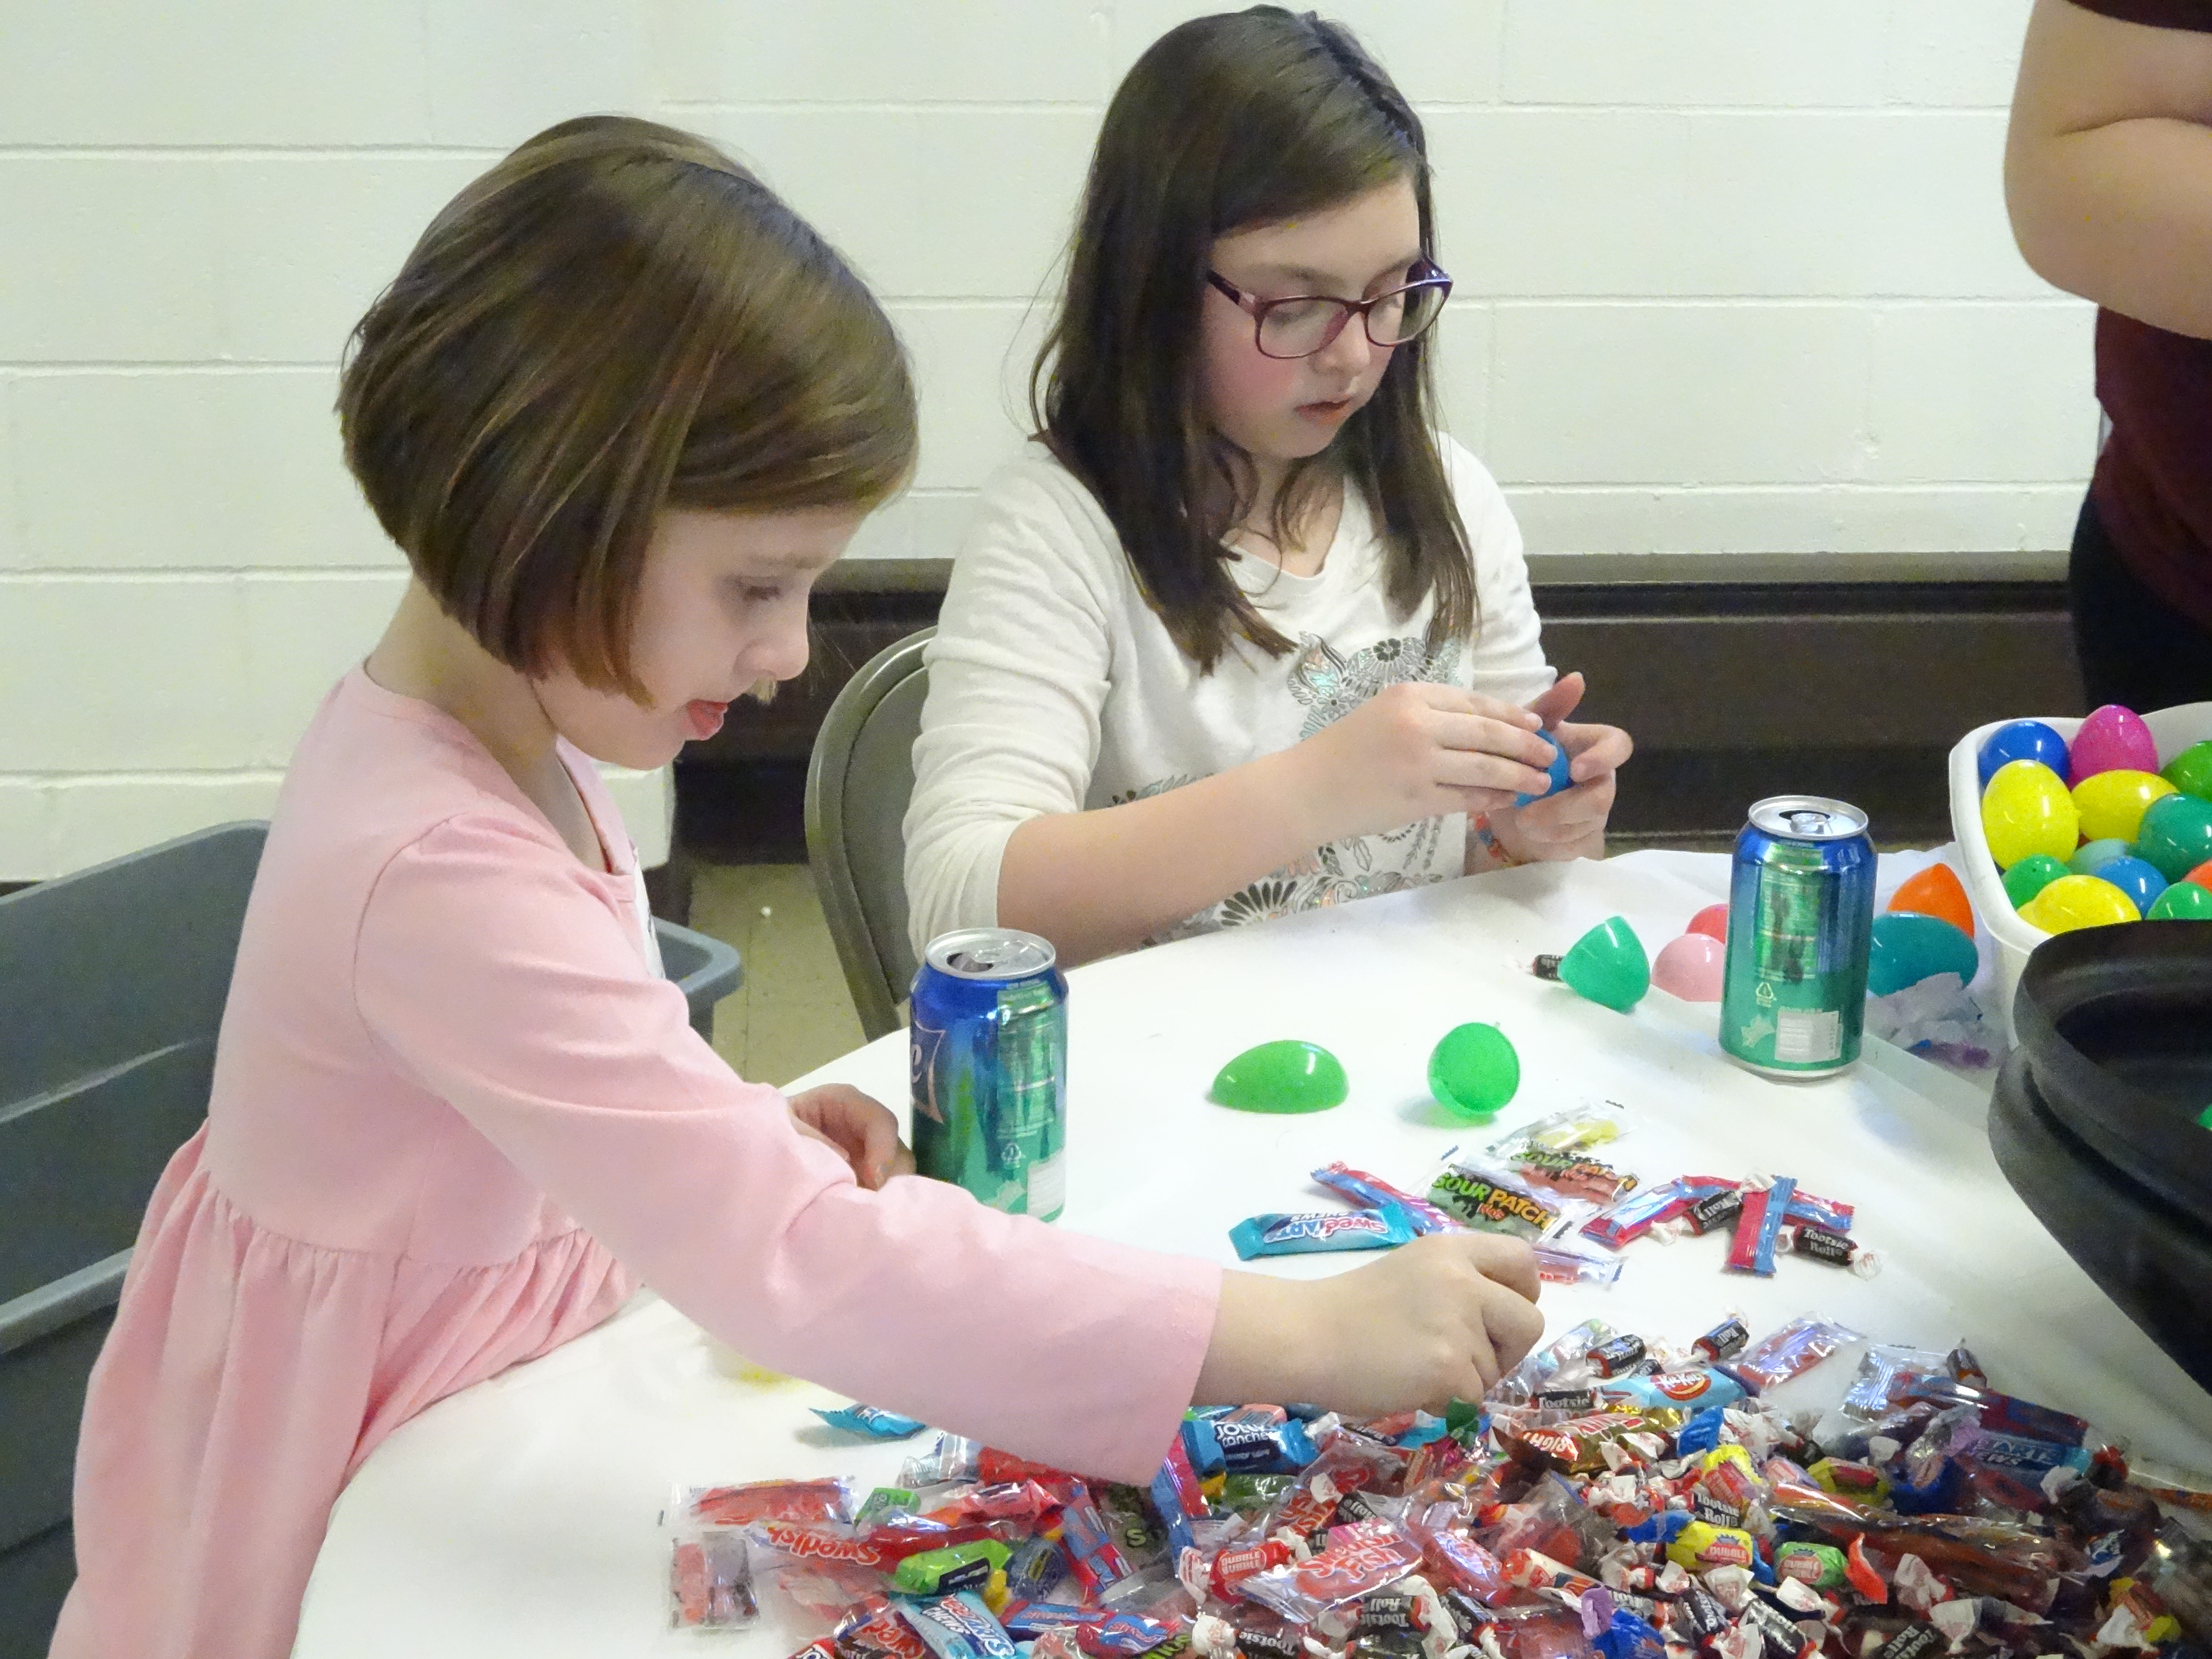 Hadleigh Fox, left, who is 7, and Hayleigh Fox, 10, stuff Easter eggs for in preparation for Six Fourteen Church's Easter egg hunt. The girls live in Hubbard.